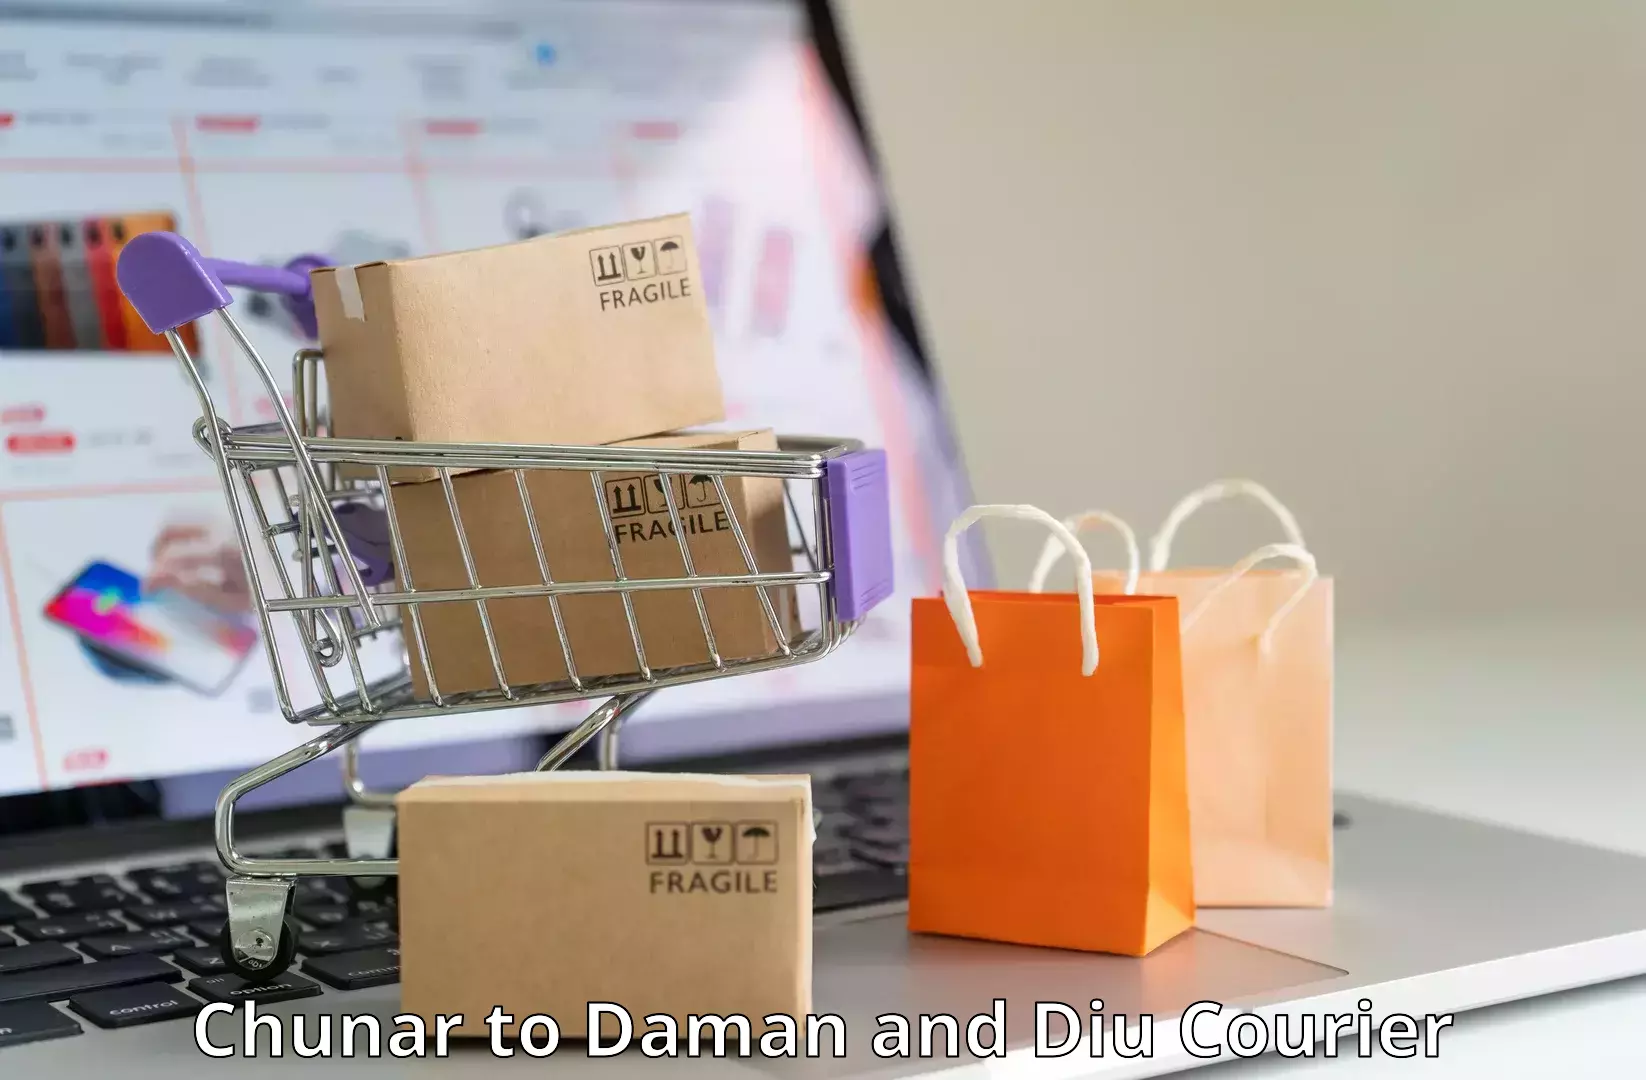 Local delivery service Chunar to Daman